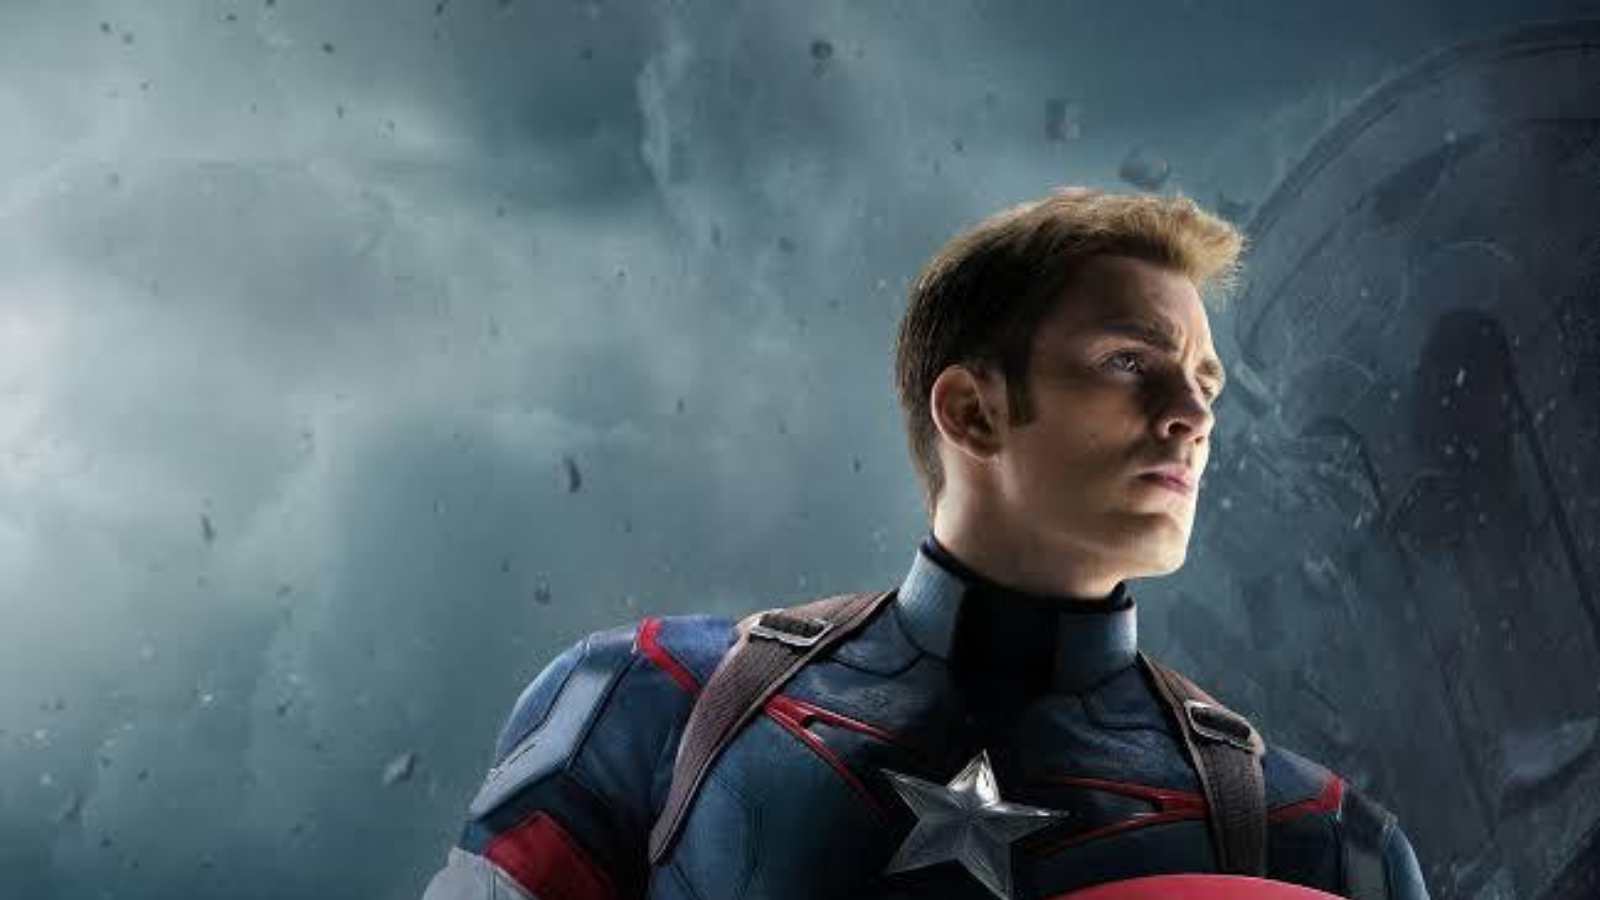 Chris Evans rejected the role of Captain America multiple times